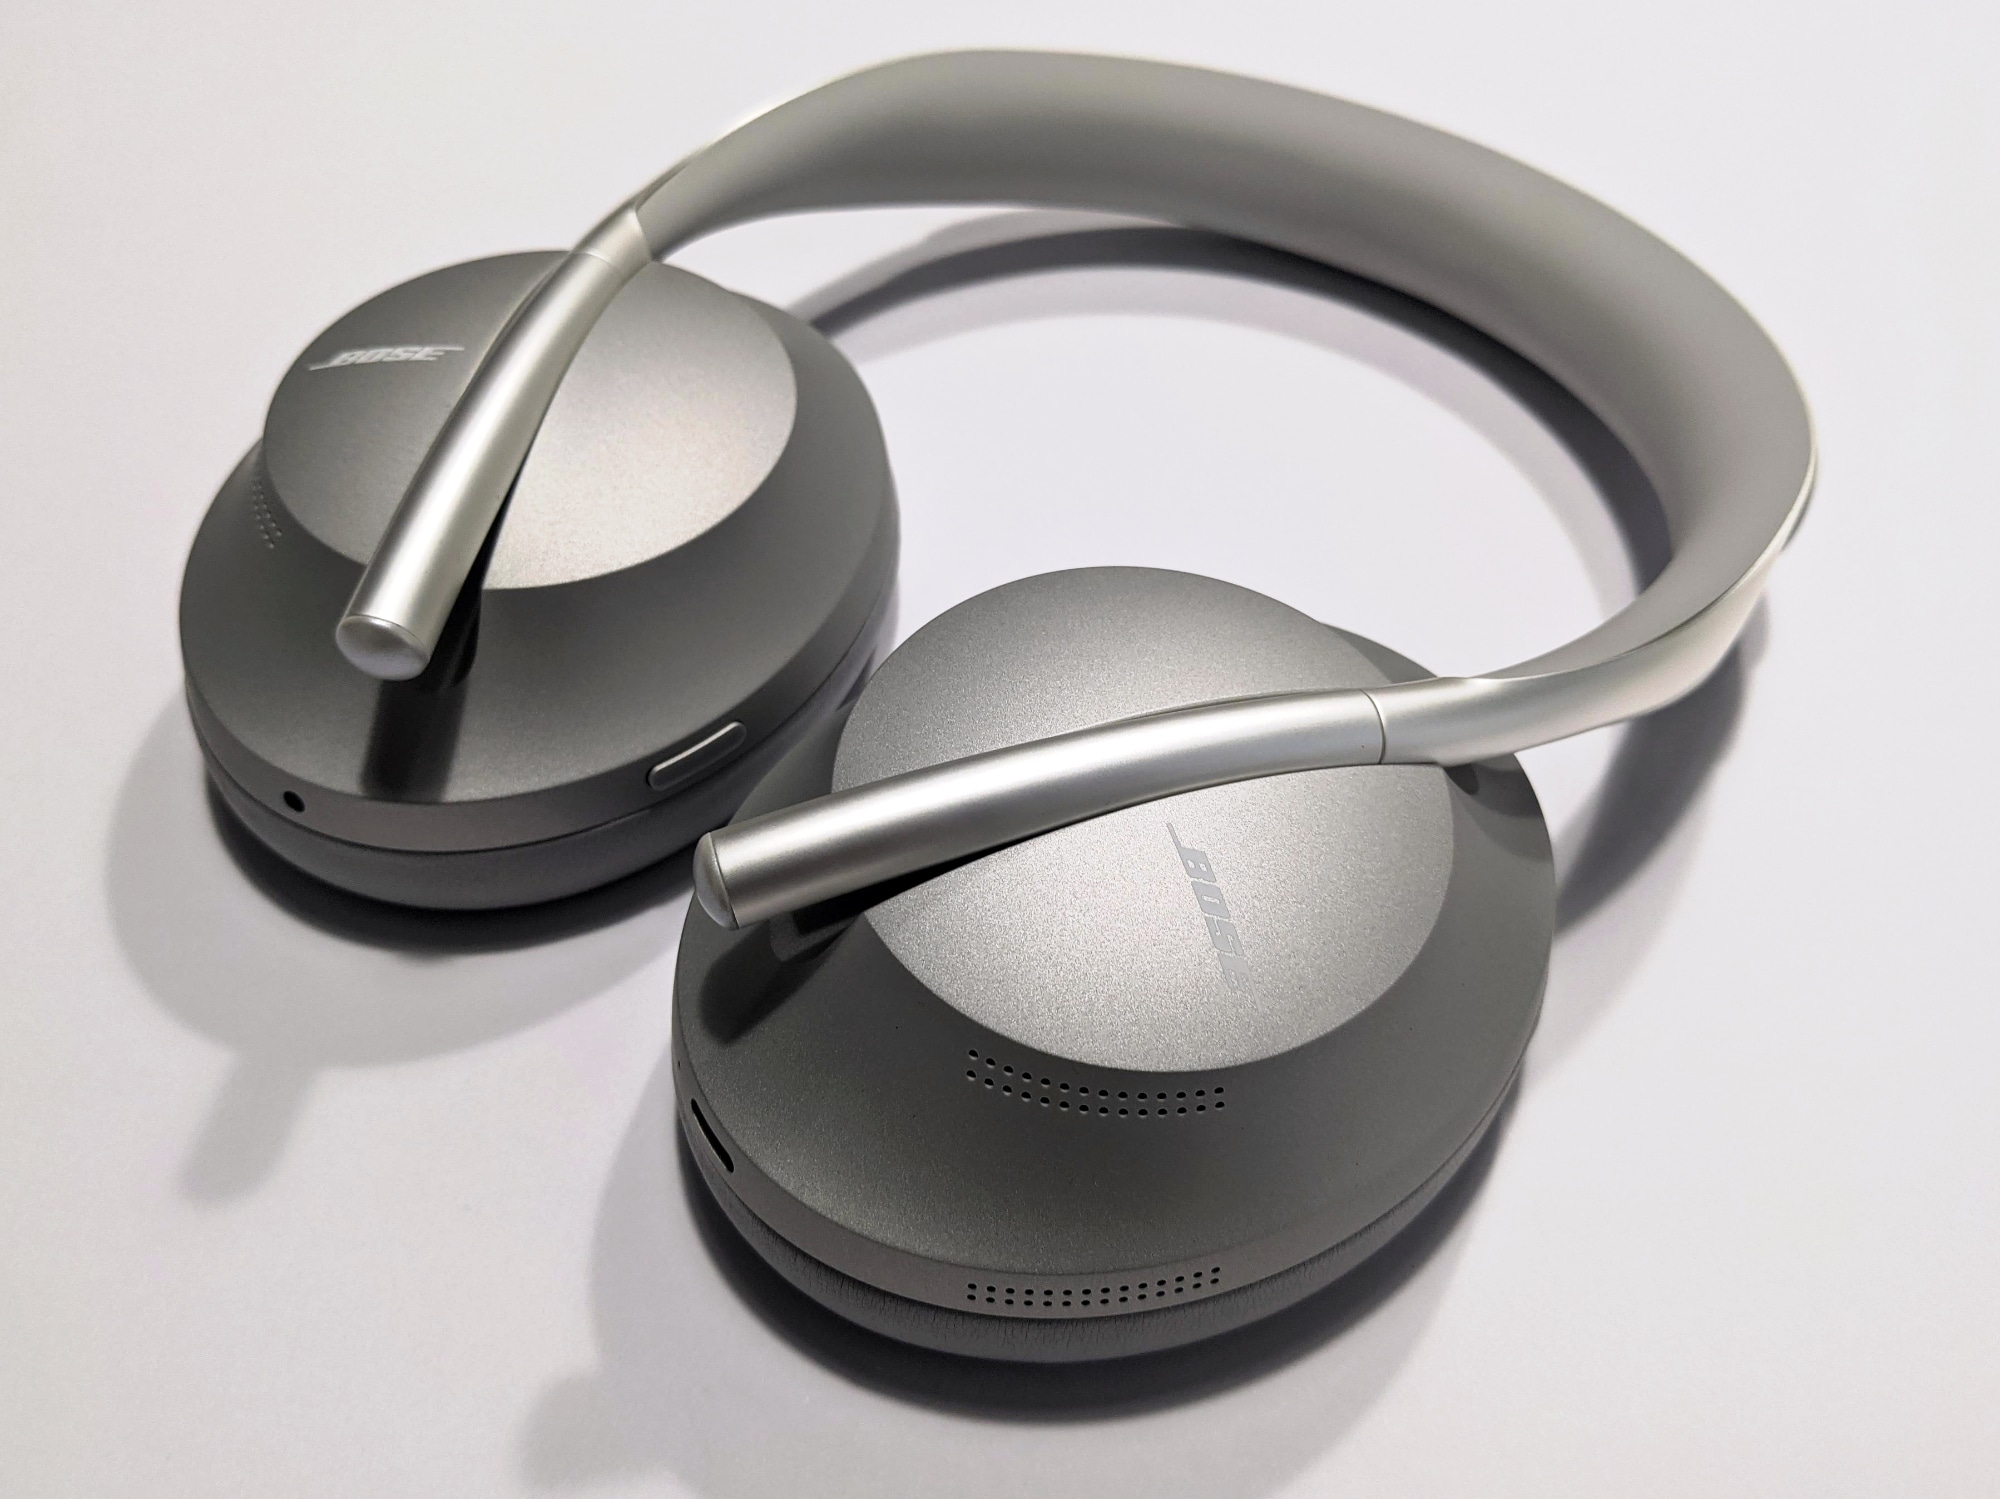 Bose's New Noise Cancelling 700 Headphones Could Be New Gold Standard